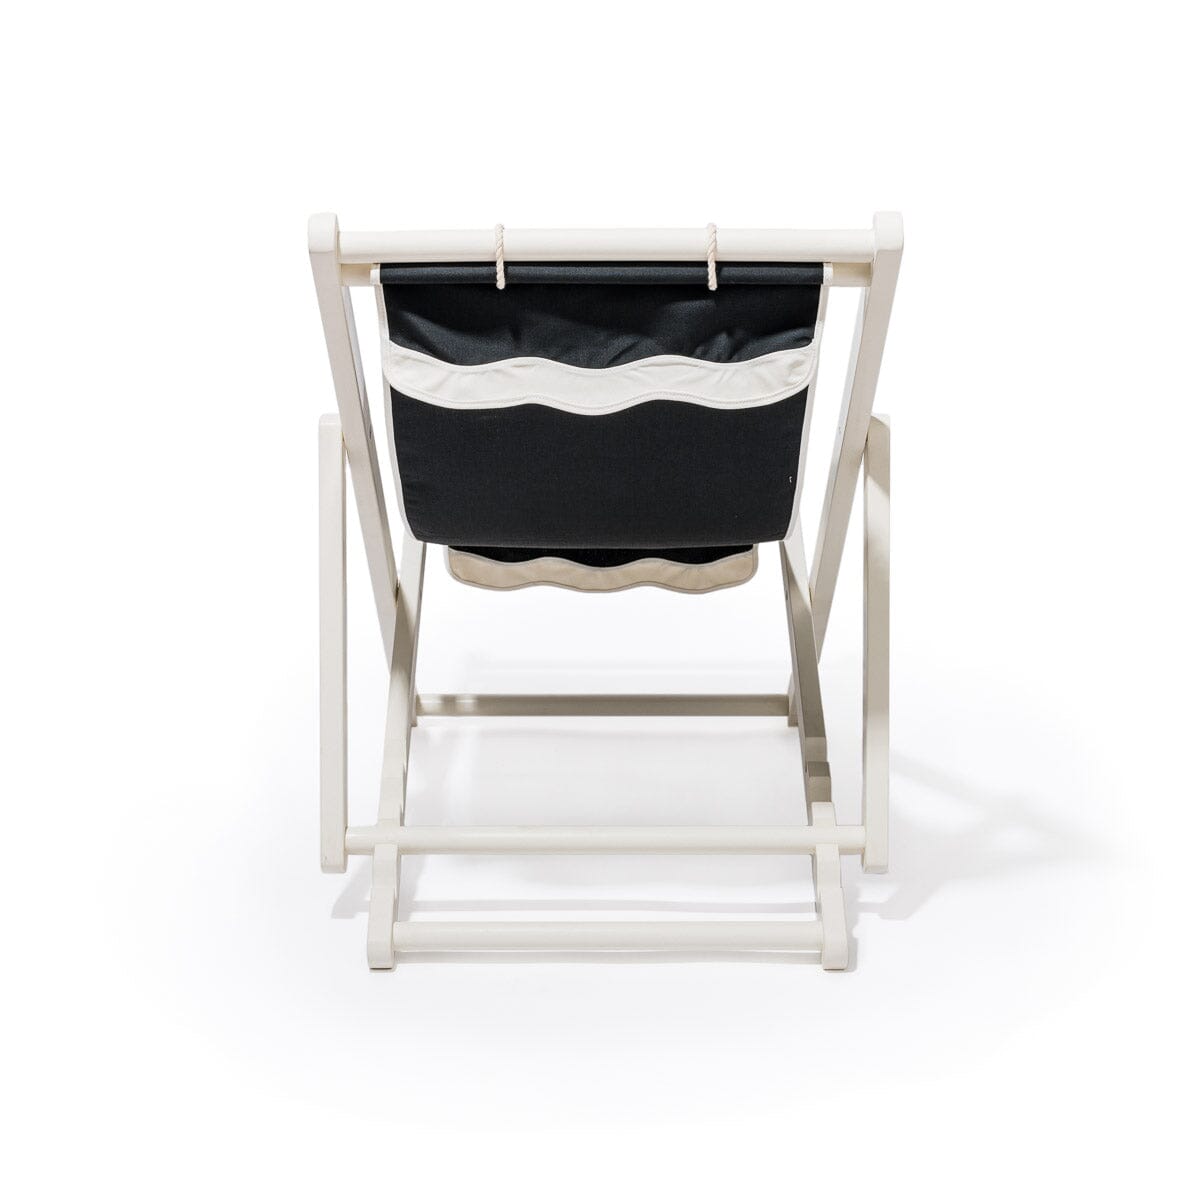 The Sling Chair - Rivie Black Sling Chair Business & Pleasure Co 